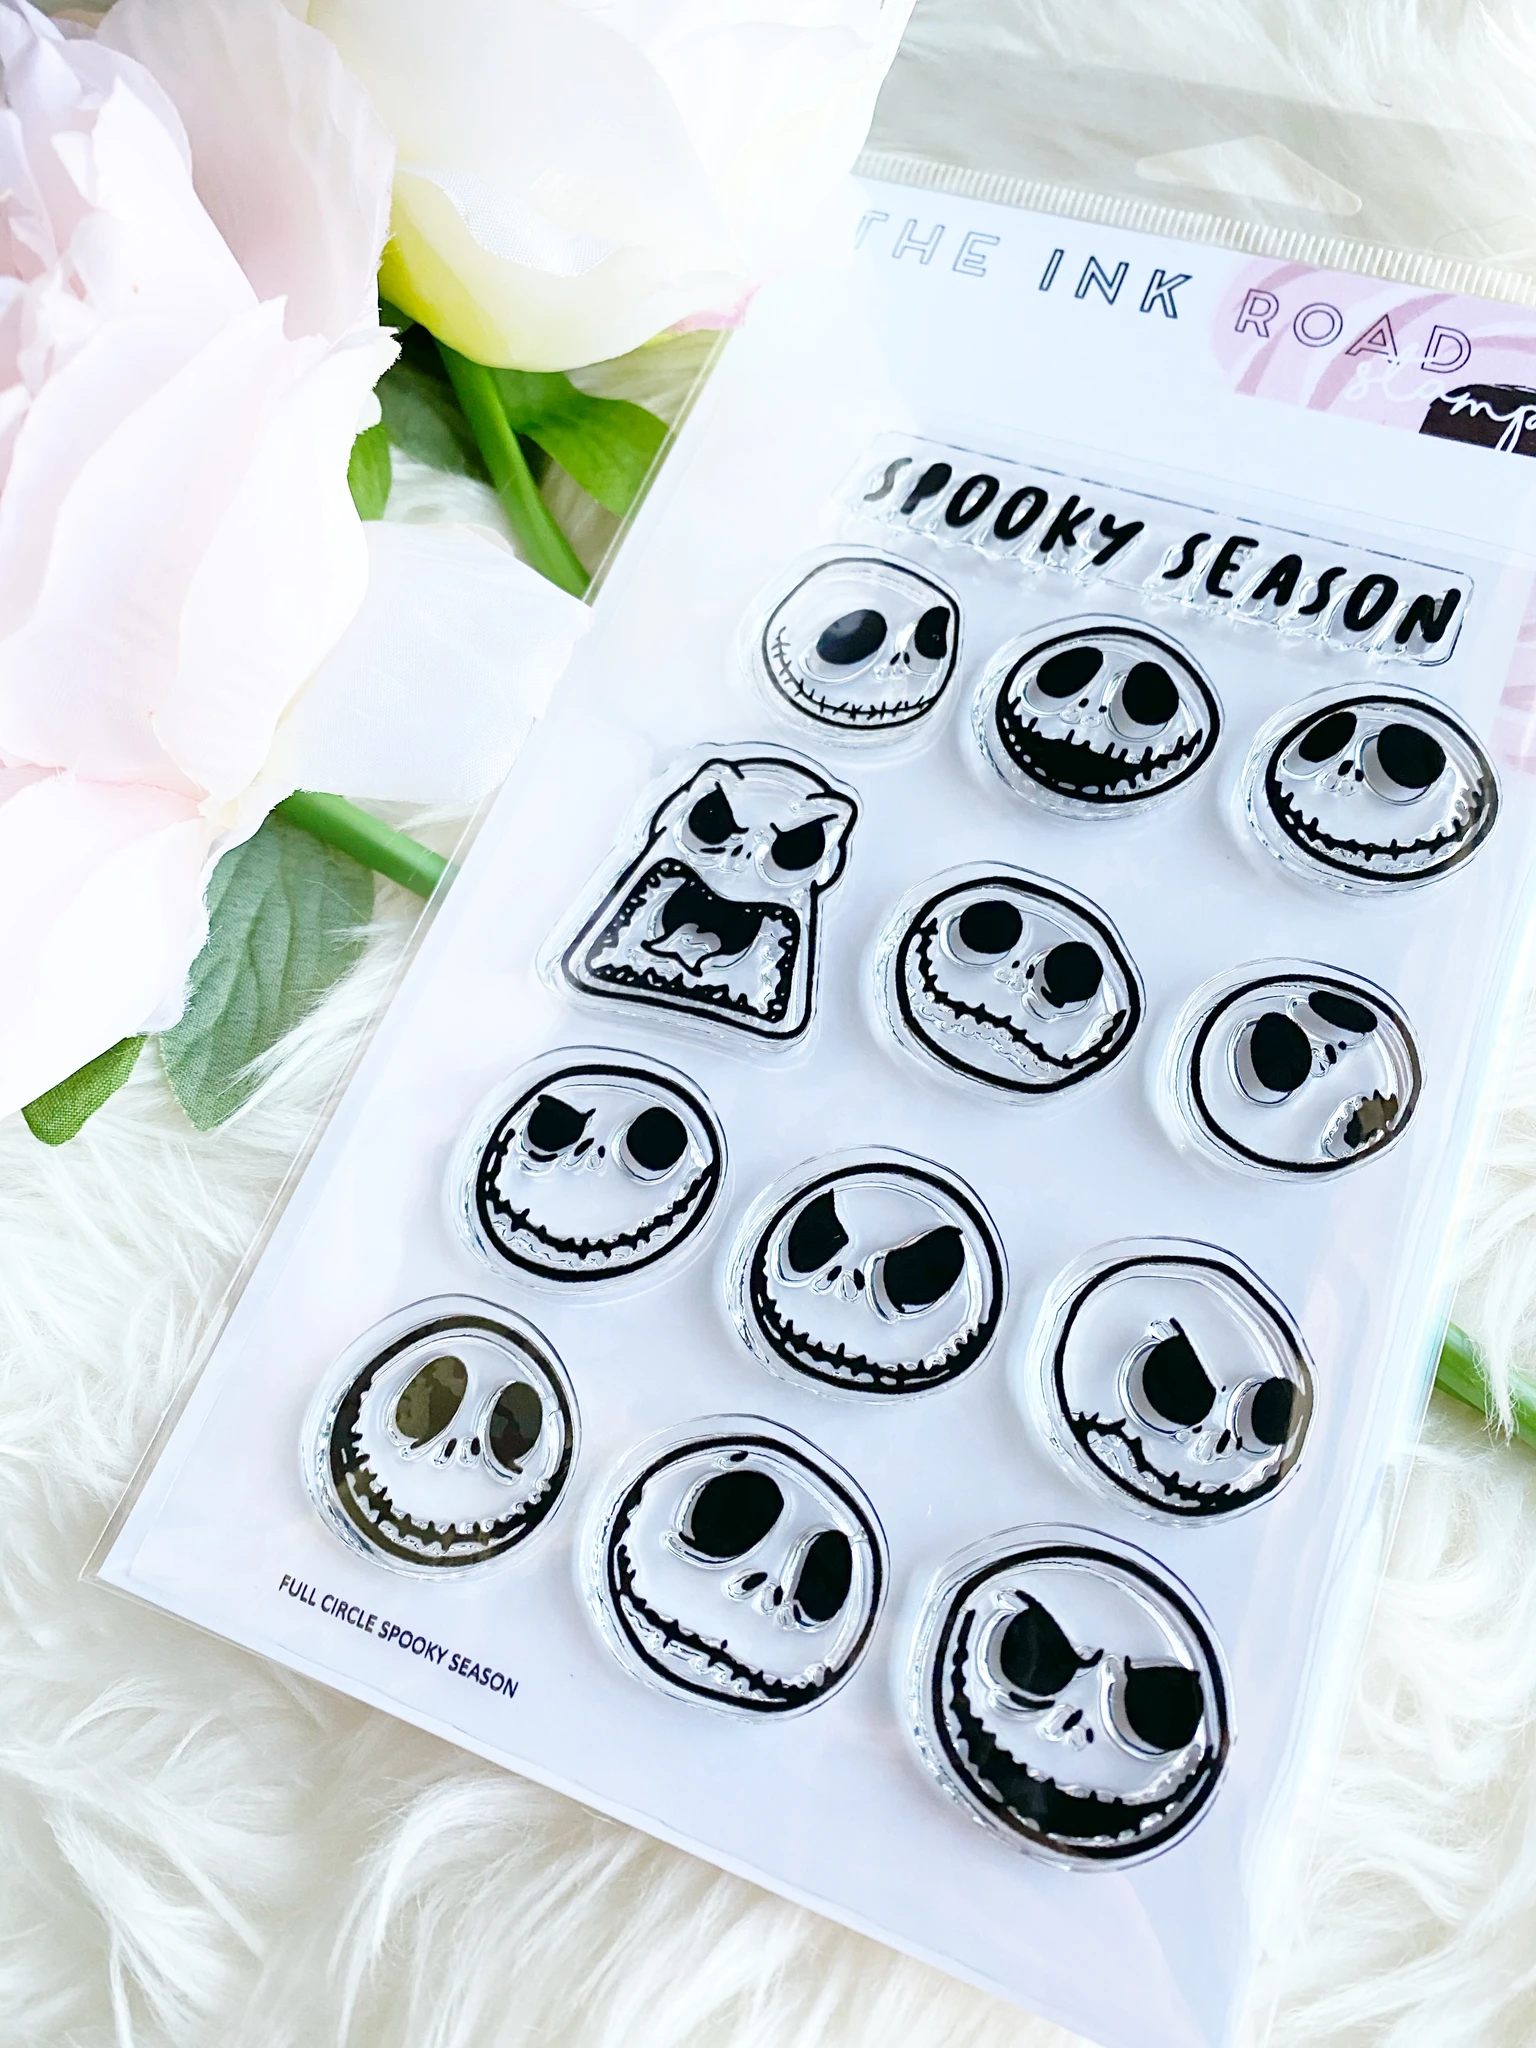 The Ink Road Clear Stamps - Full Circle: Spooky Season